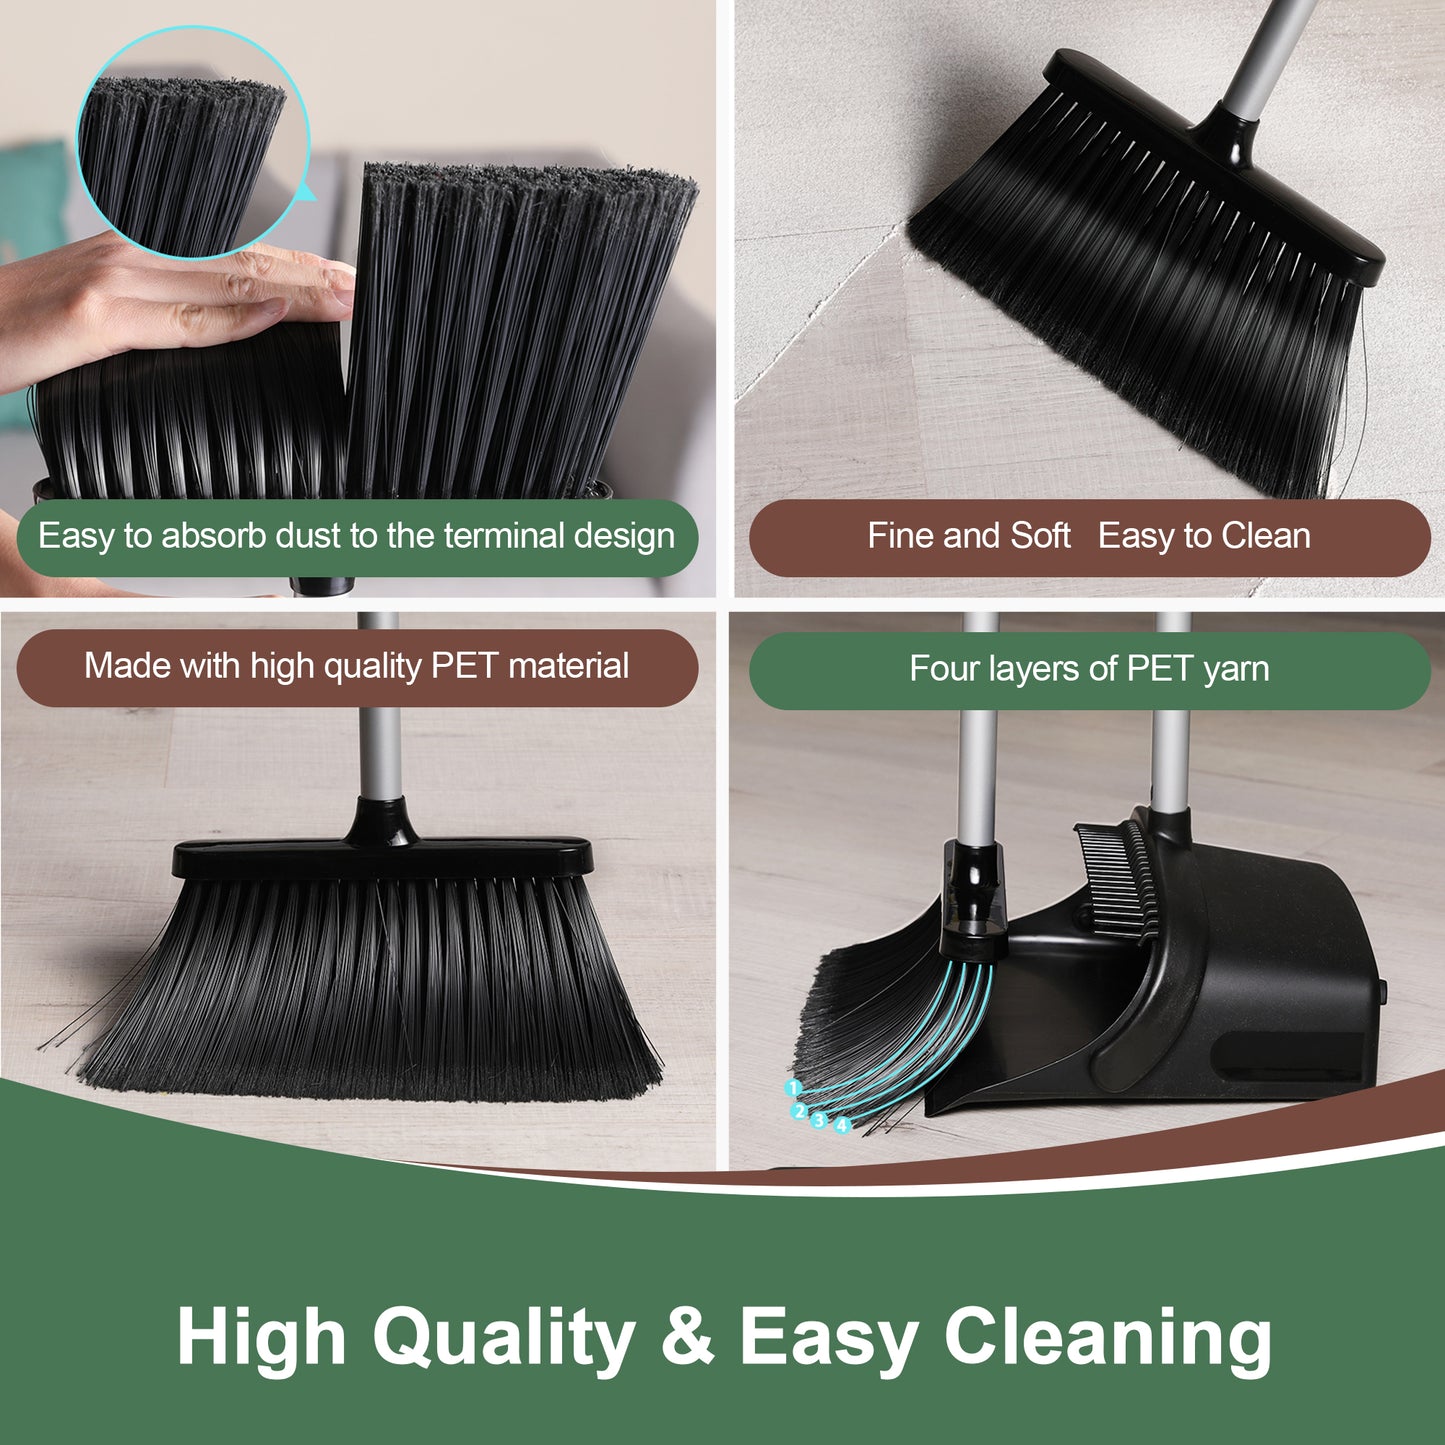 Eyliden Broom Dustpan Set, Broom and Dustpan Combo with 52" Long Handle for Lobby Kitchen Room Office Indoor, Dustpan with Broom Set for Home, Floor Use Lobby Dust Pan Sweep Combo Black